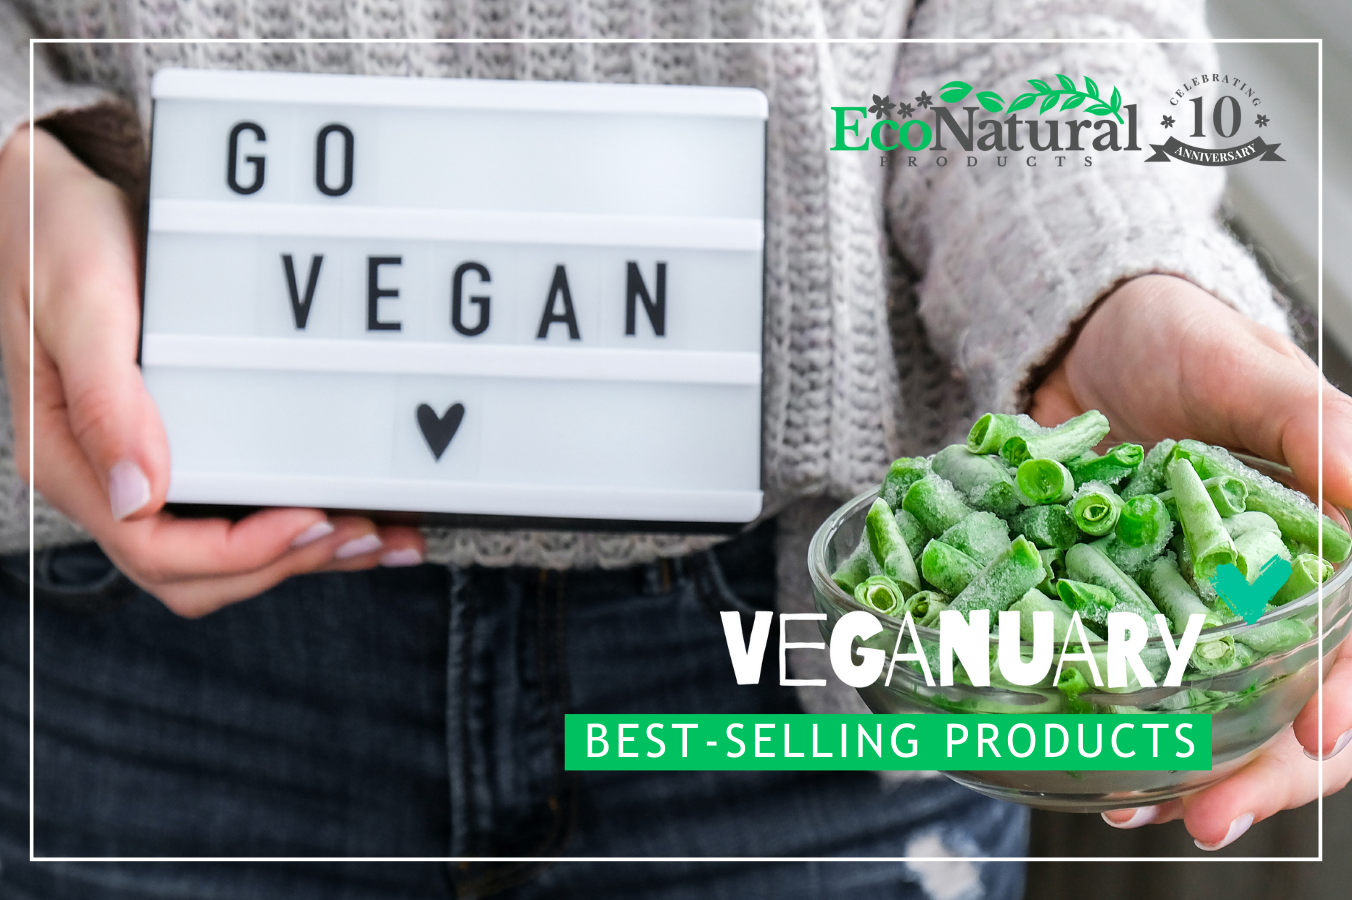 Veganuary & Eco Natural Products: Our best-selling vegan products